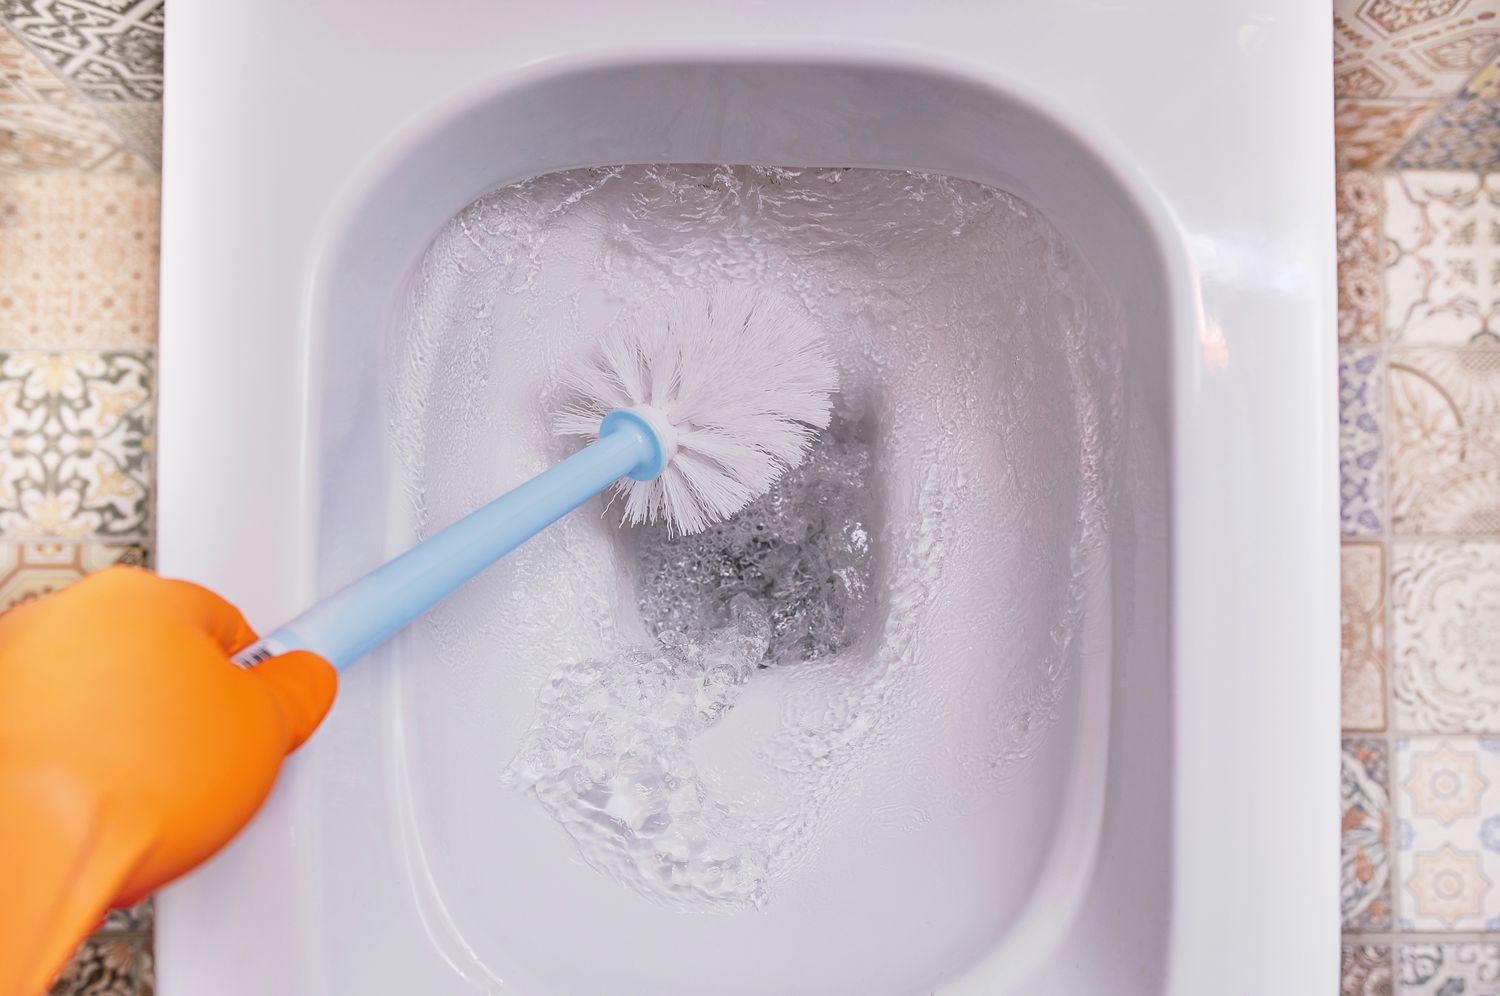 How To Clean A Toilet Brush